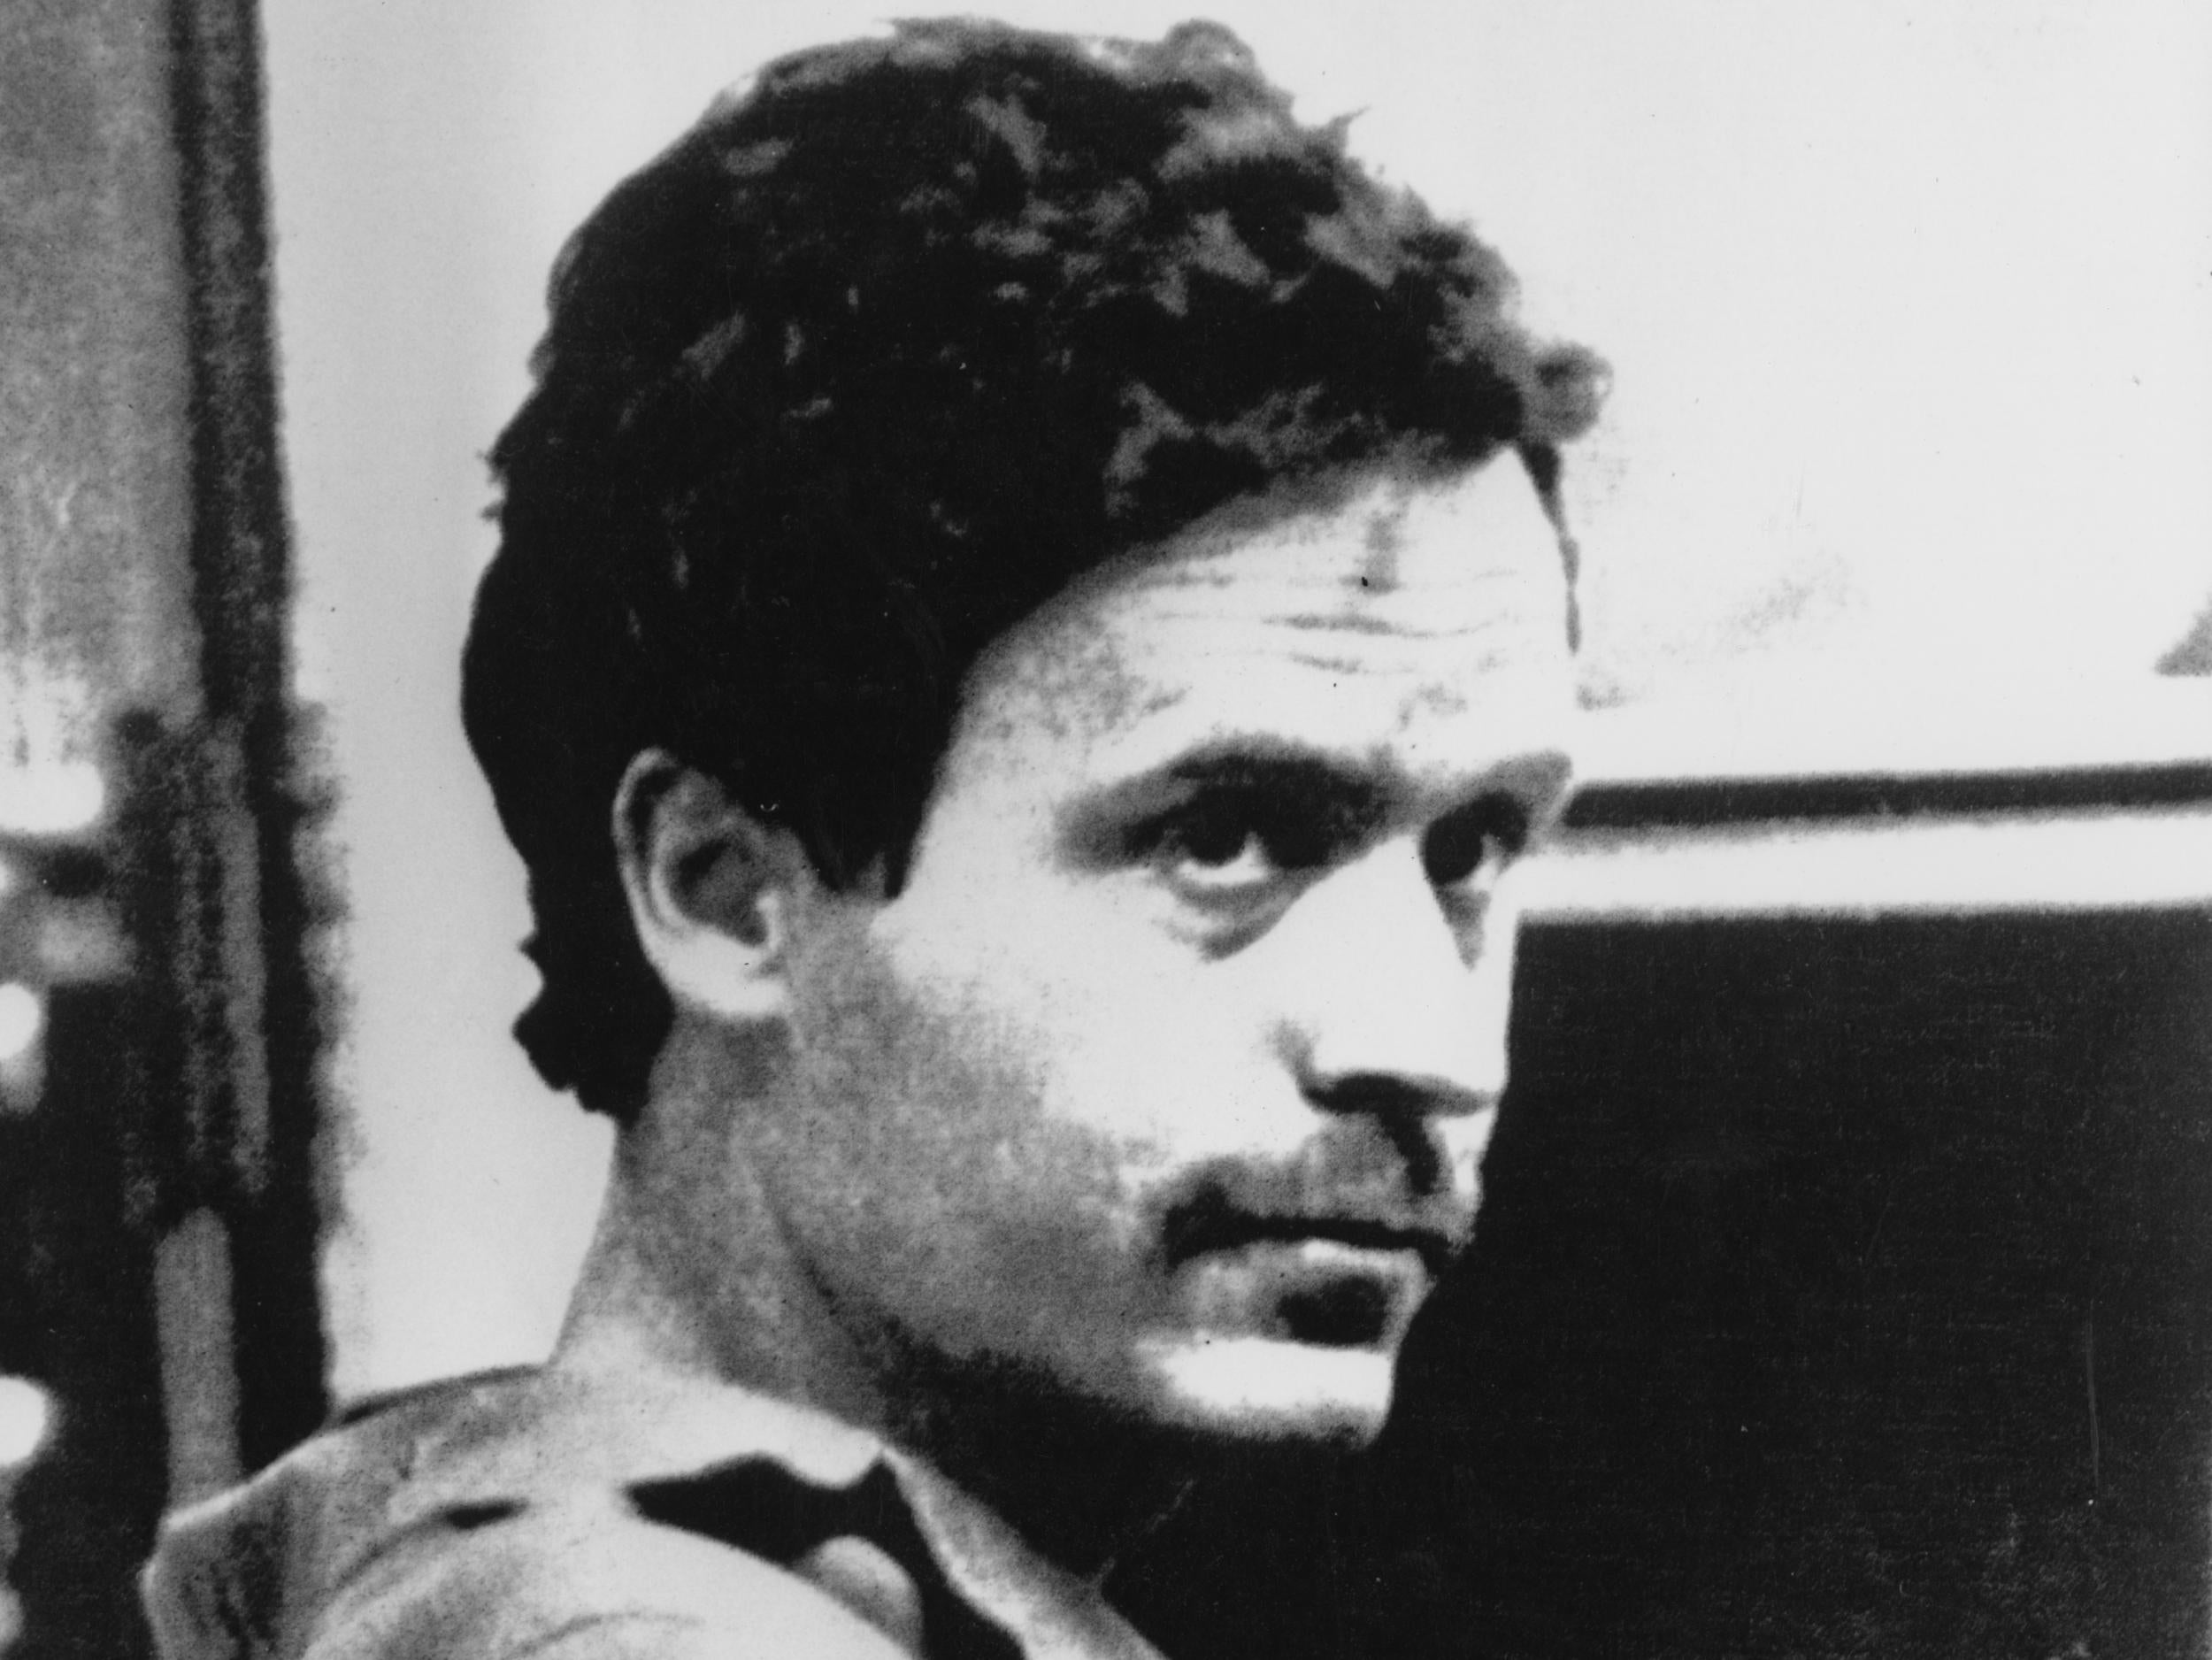 Prolific serial killer Ted Bundy allegedly dated the aunt of one of the contributors to the thread